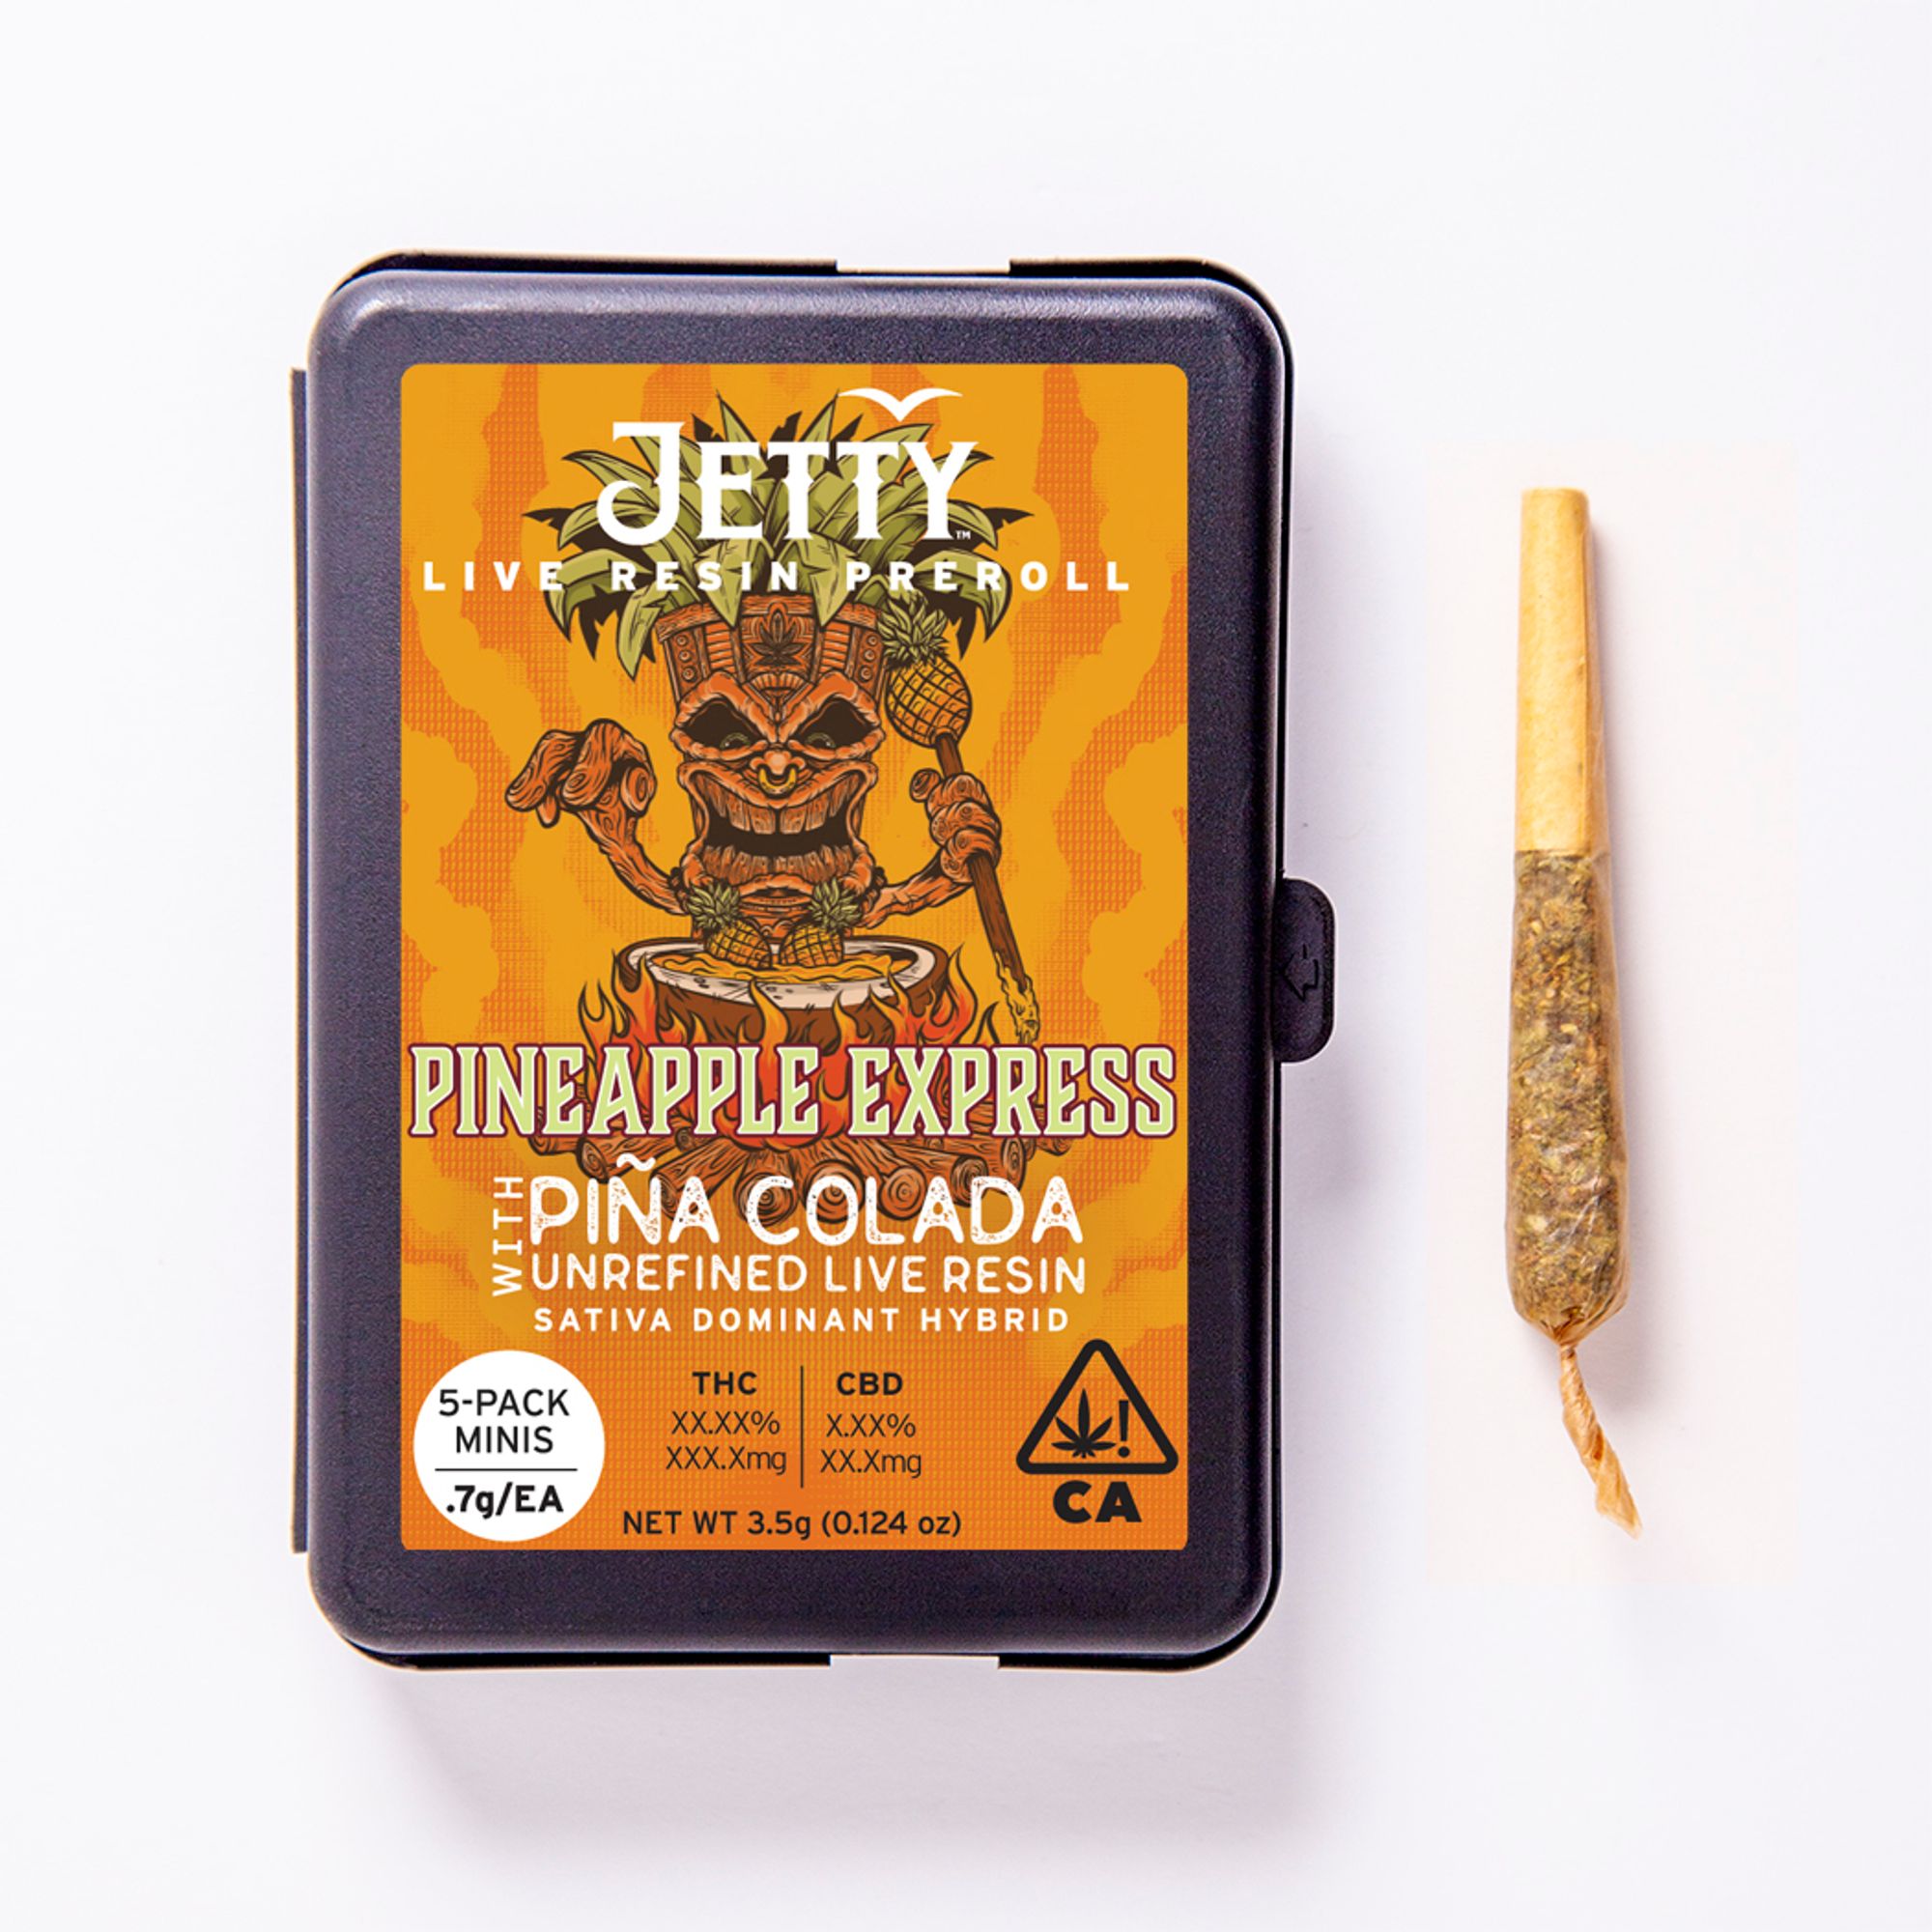 Pineapple Express x Piña Colada UNREFINED Live Resin Infused 5pk